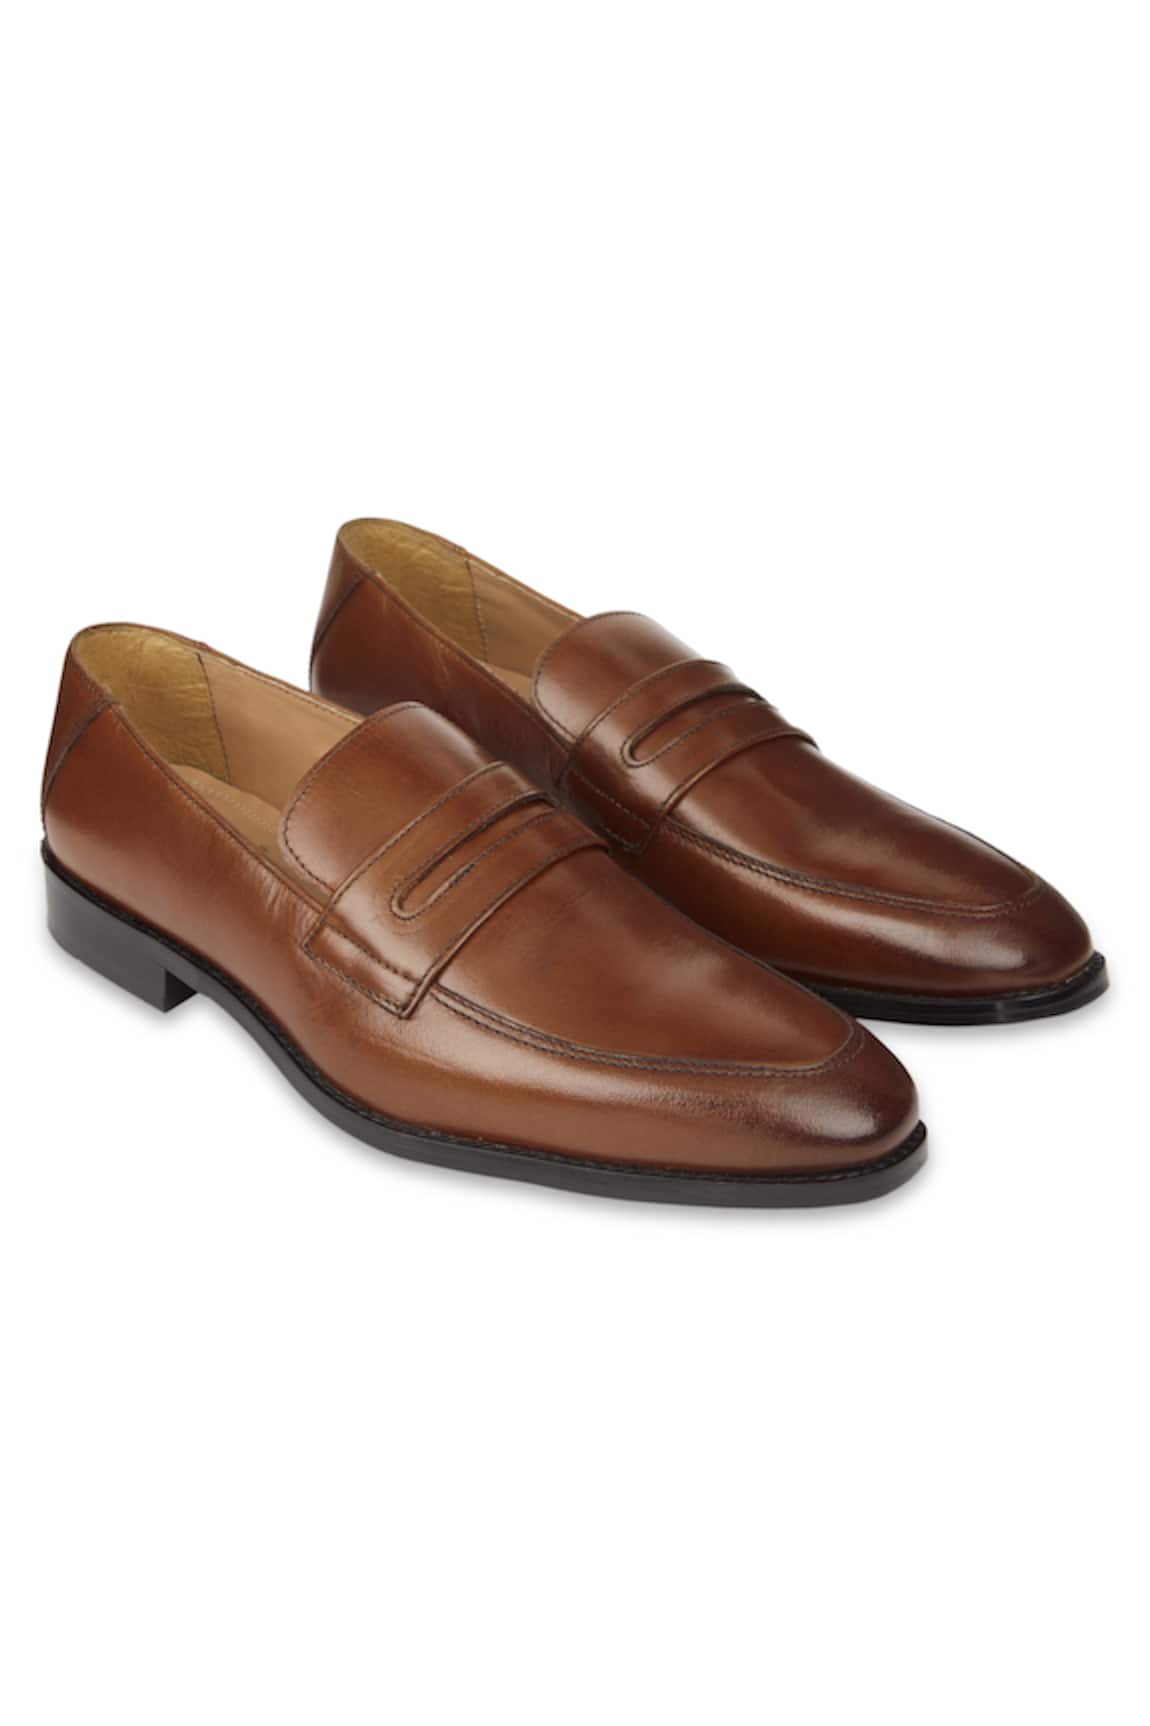 Hats Off Accessories Pointed Toe Leather Penny Loafers